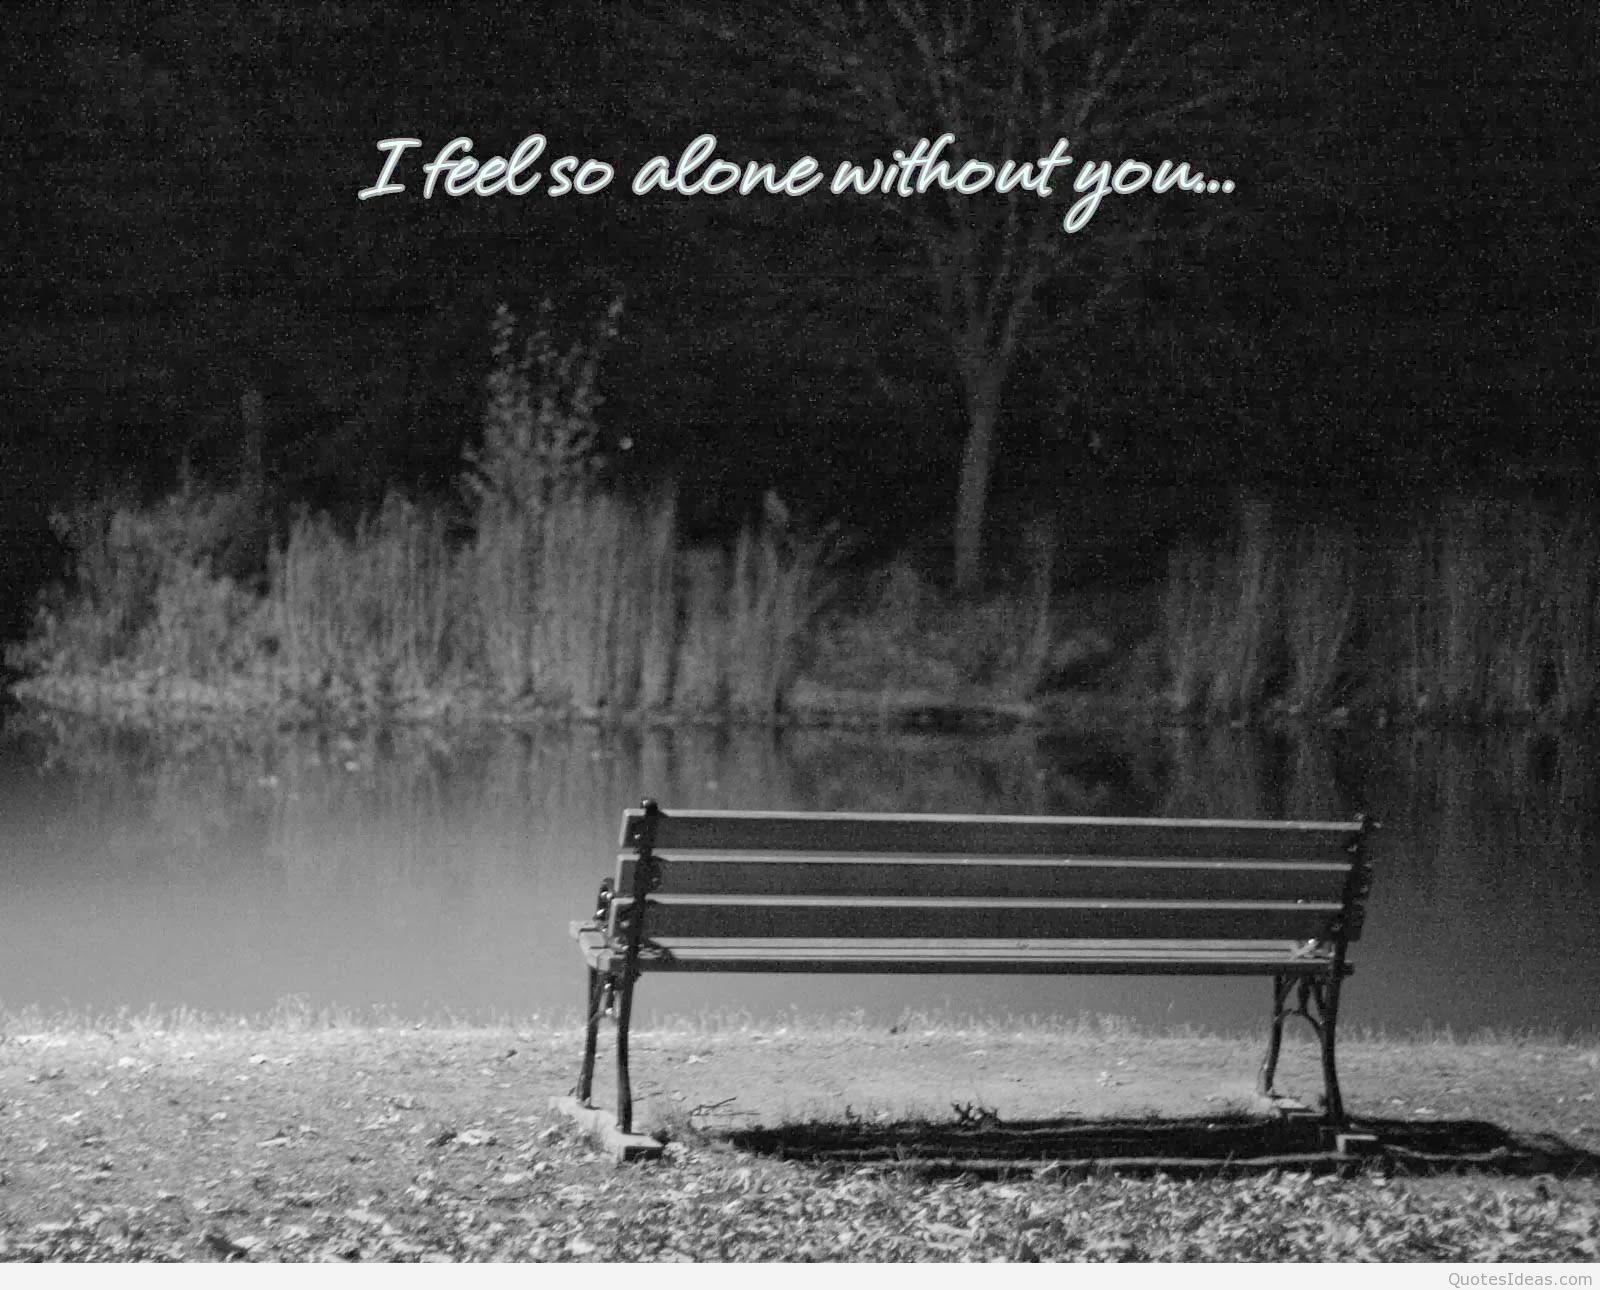 Sad alone quotes with image wallpaper hd